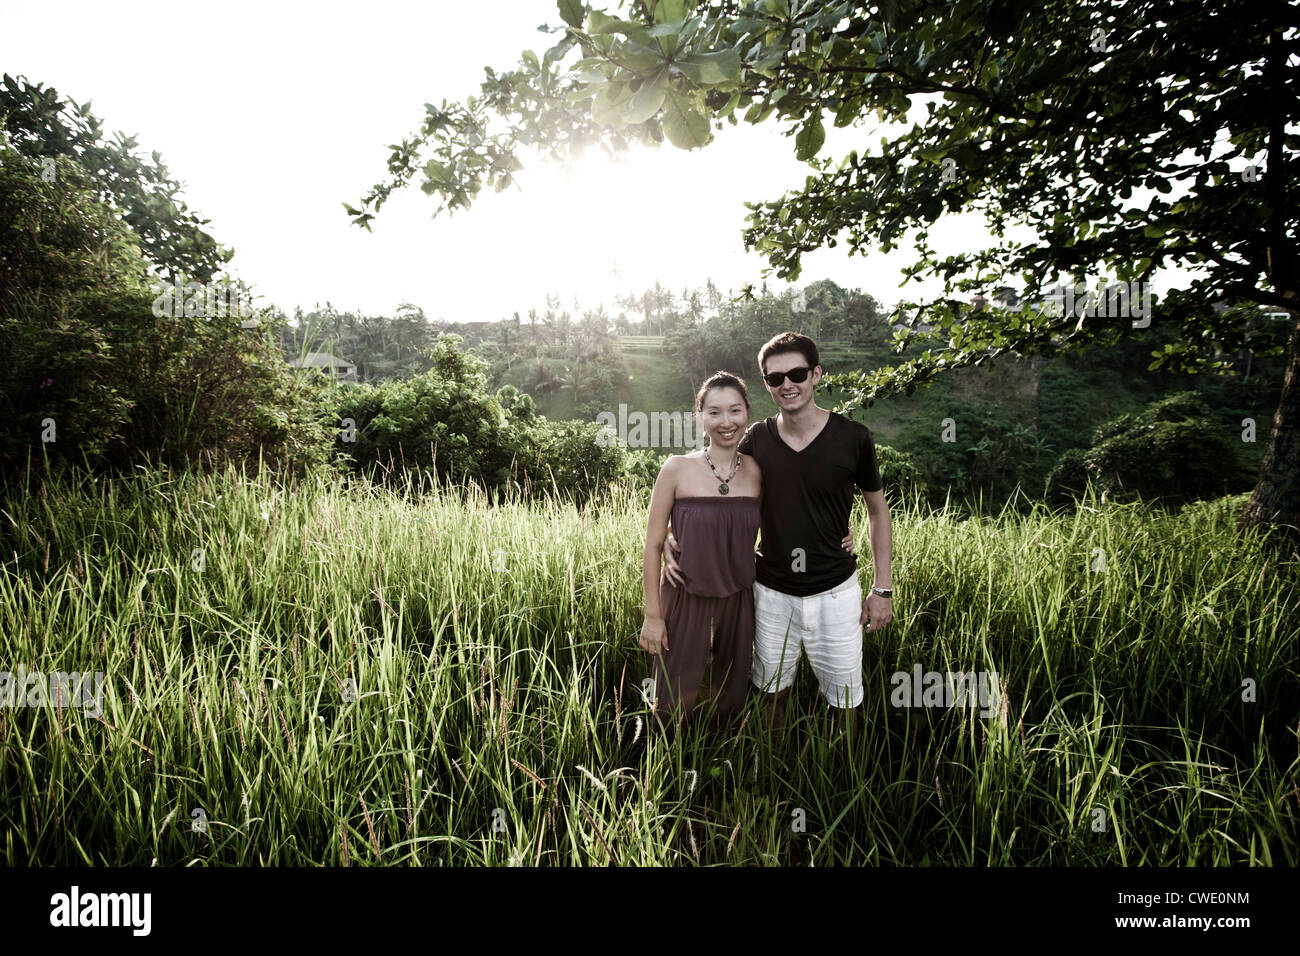 A happy married couple holding hands and walking in a lush jungle setting in Bali, Indonesia. Stock Photo